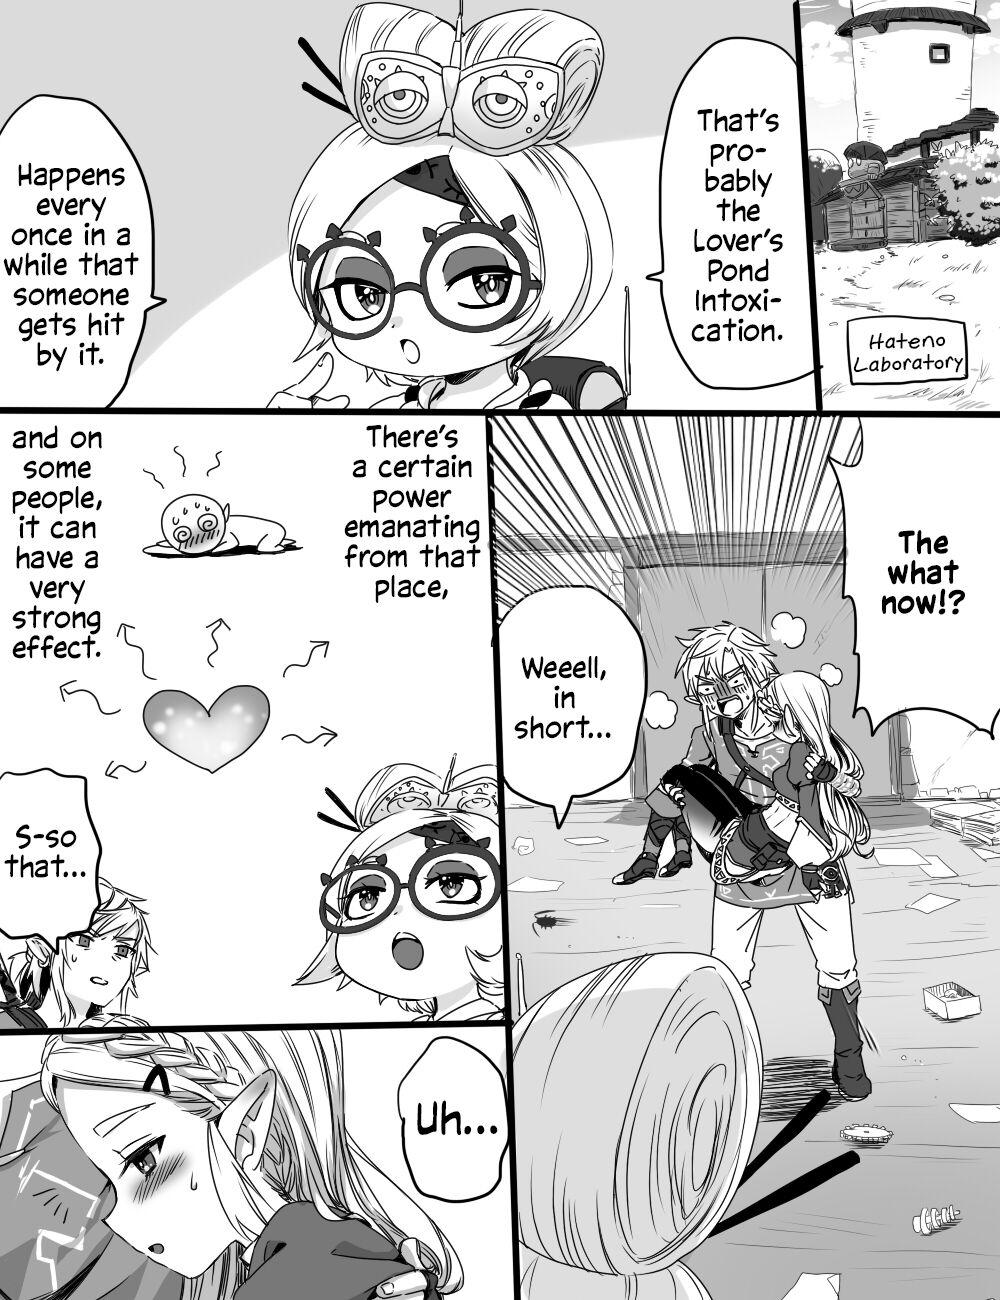 Mature Love Pond Power | The Power of the Lover's Pond - The legend of zelda Cuckolding - Page 4